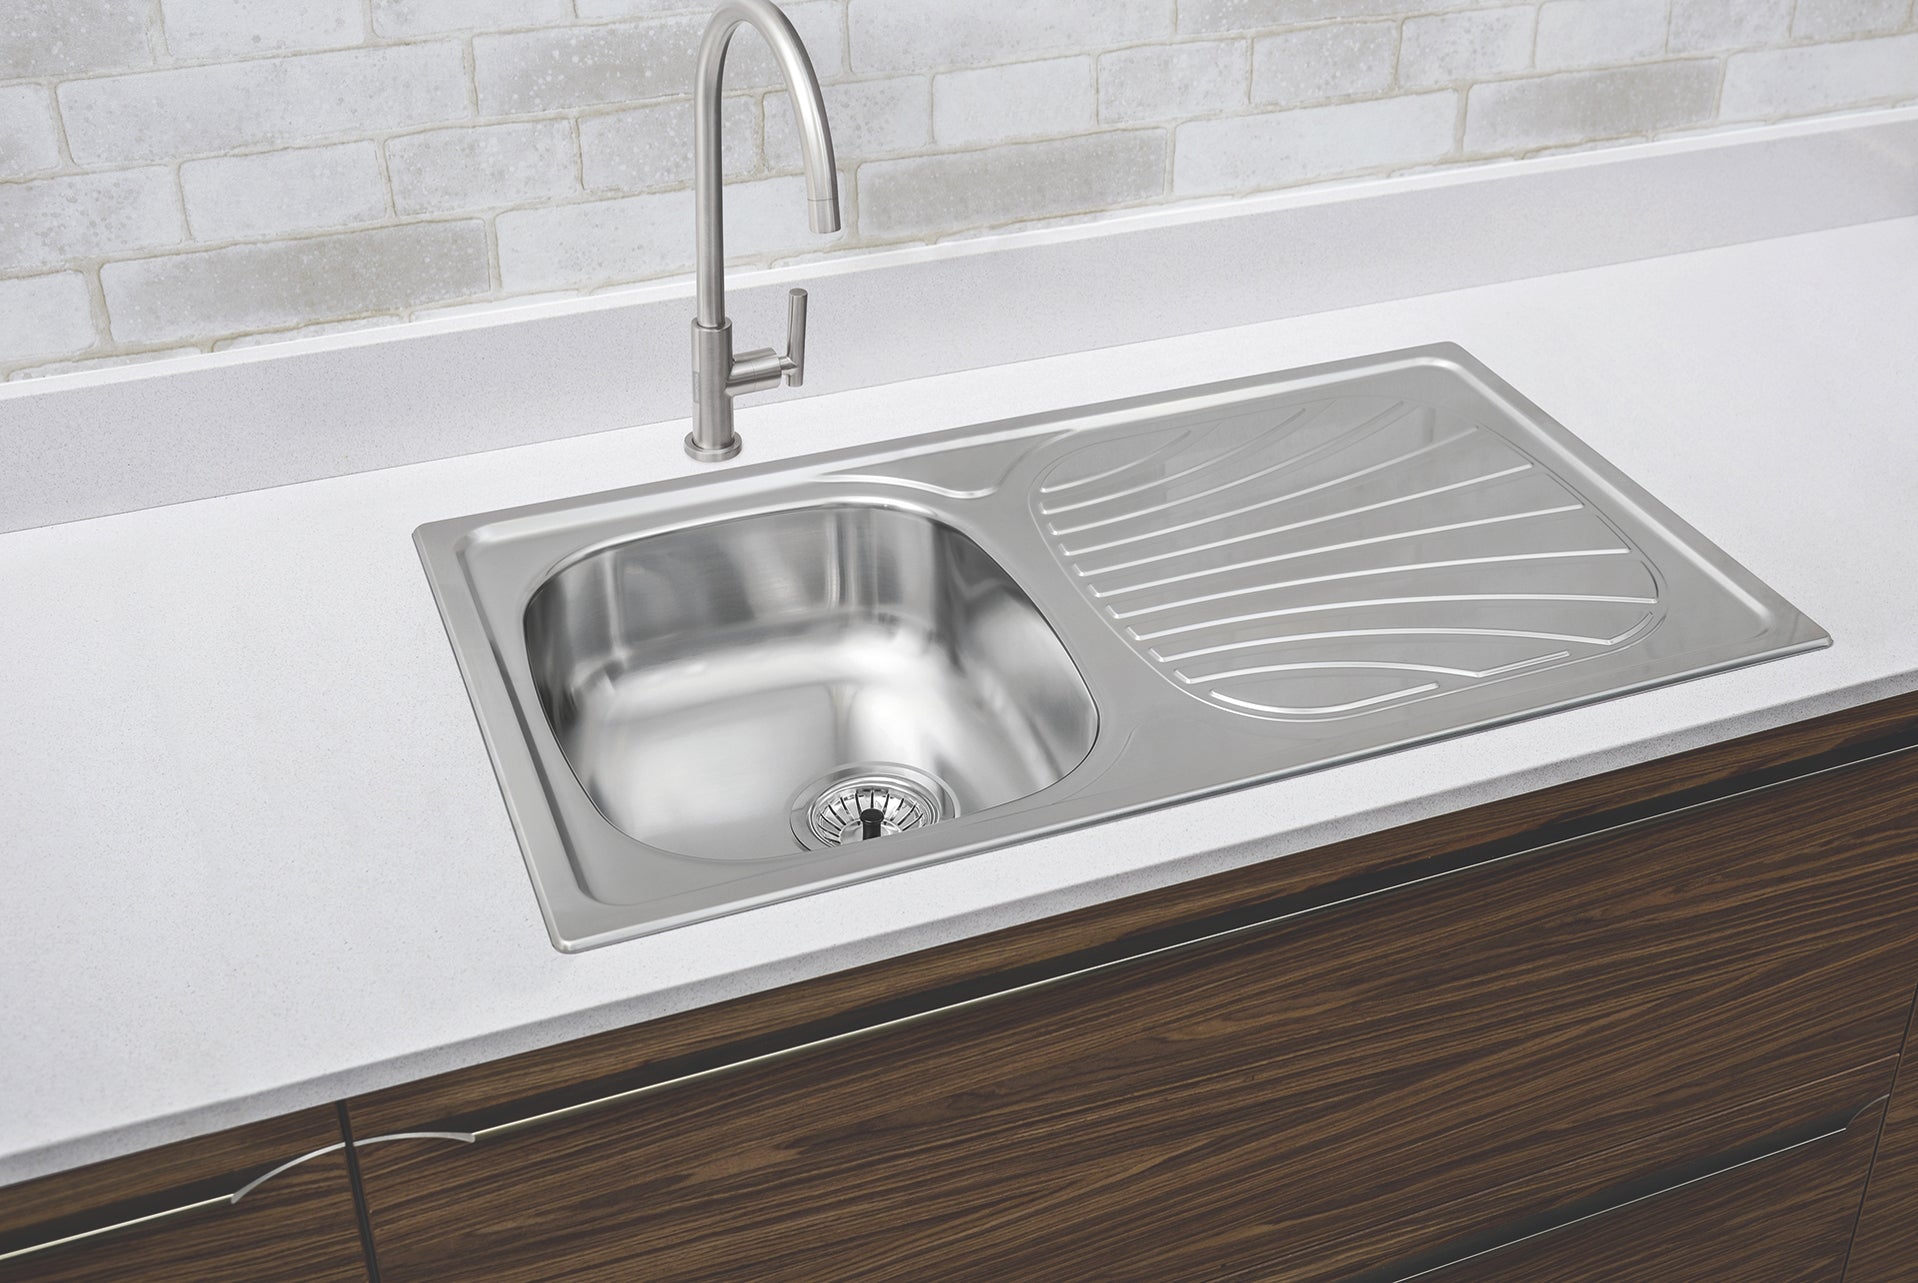 LINSOL PRIME 21L SINK AND TRAY STAINLESS STEEL 860MM